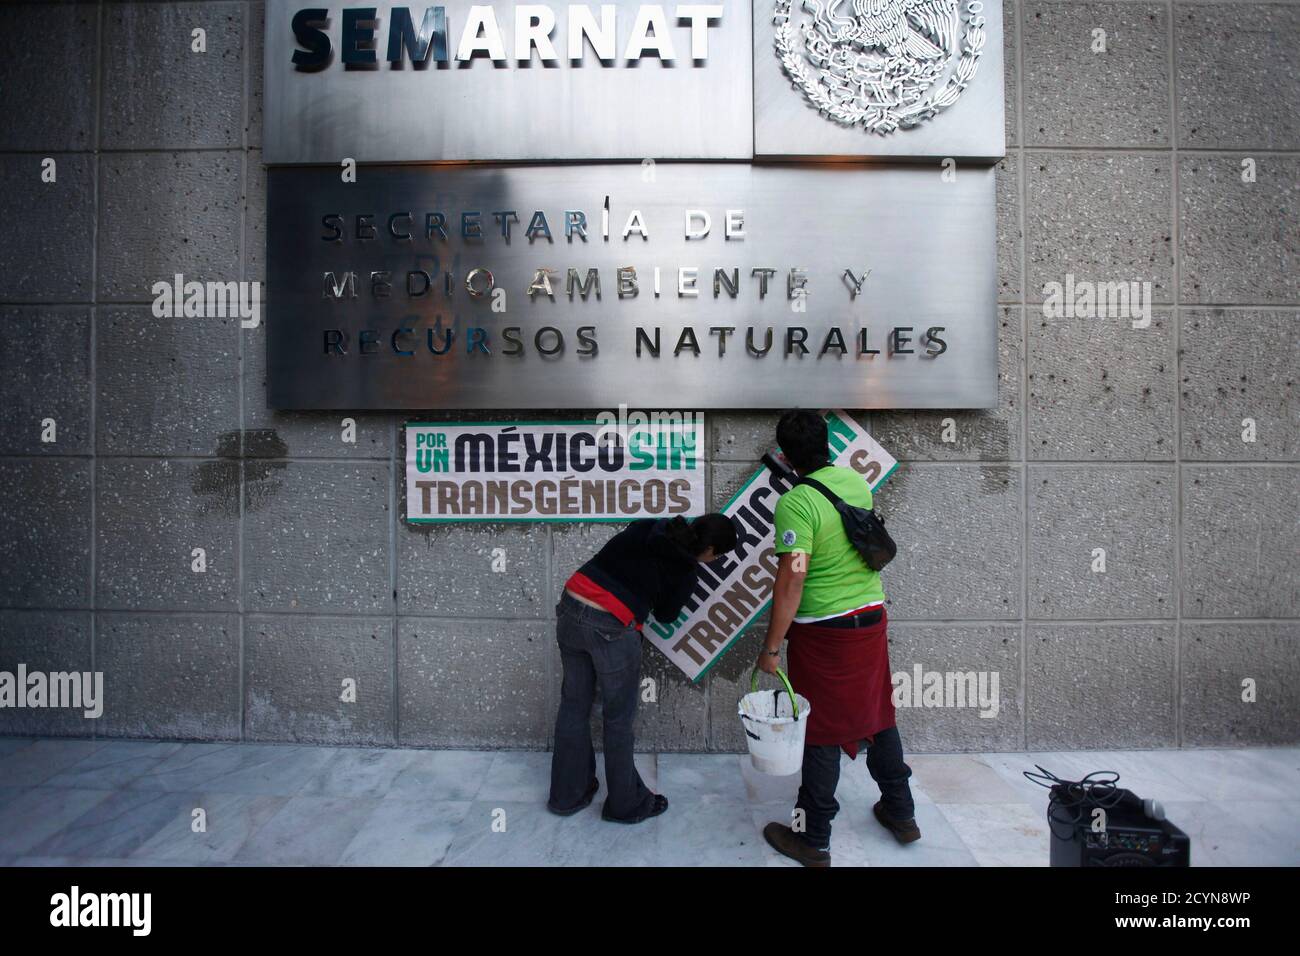 Greenpeace activists stick a poster in protest against the cultivation of transgenic maize outside the SEMARNAT (Secretary of Environment and Natural Resources) building in Mexico City June 5, 2012. The poster reads, 'Mexico free transgenic.' REUTERS/Edgard Garrido (MEXICO - Tags: ENVIRONMENT CIVIL UNREST AGRICULTURE) Stock Photo